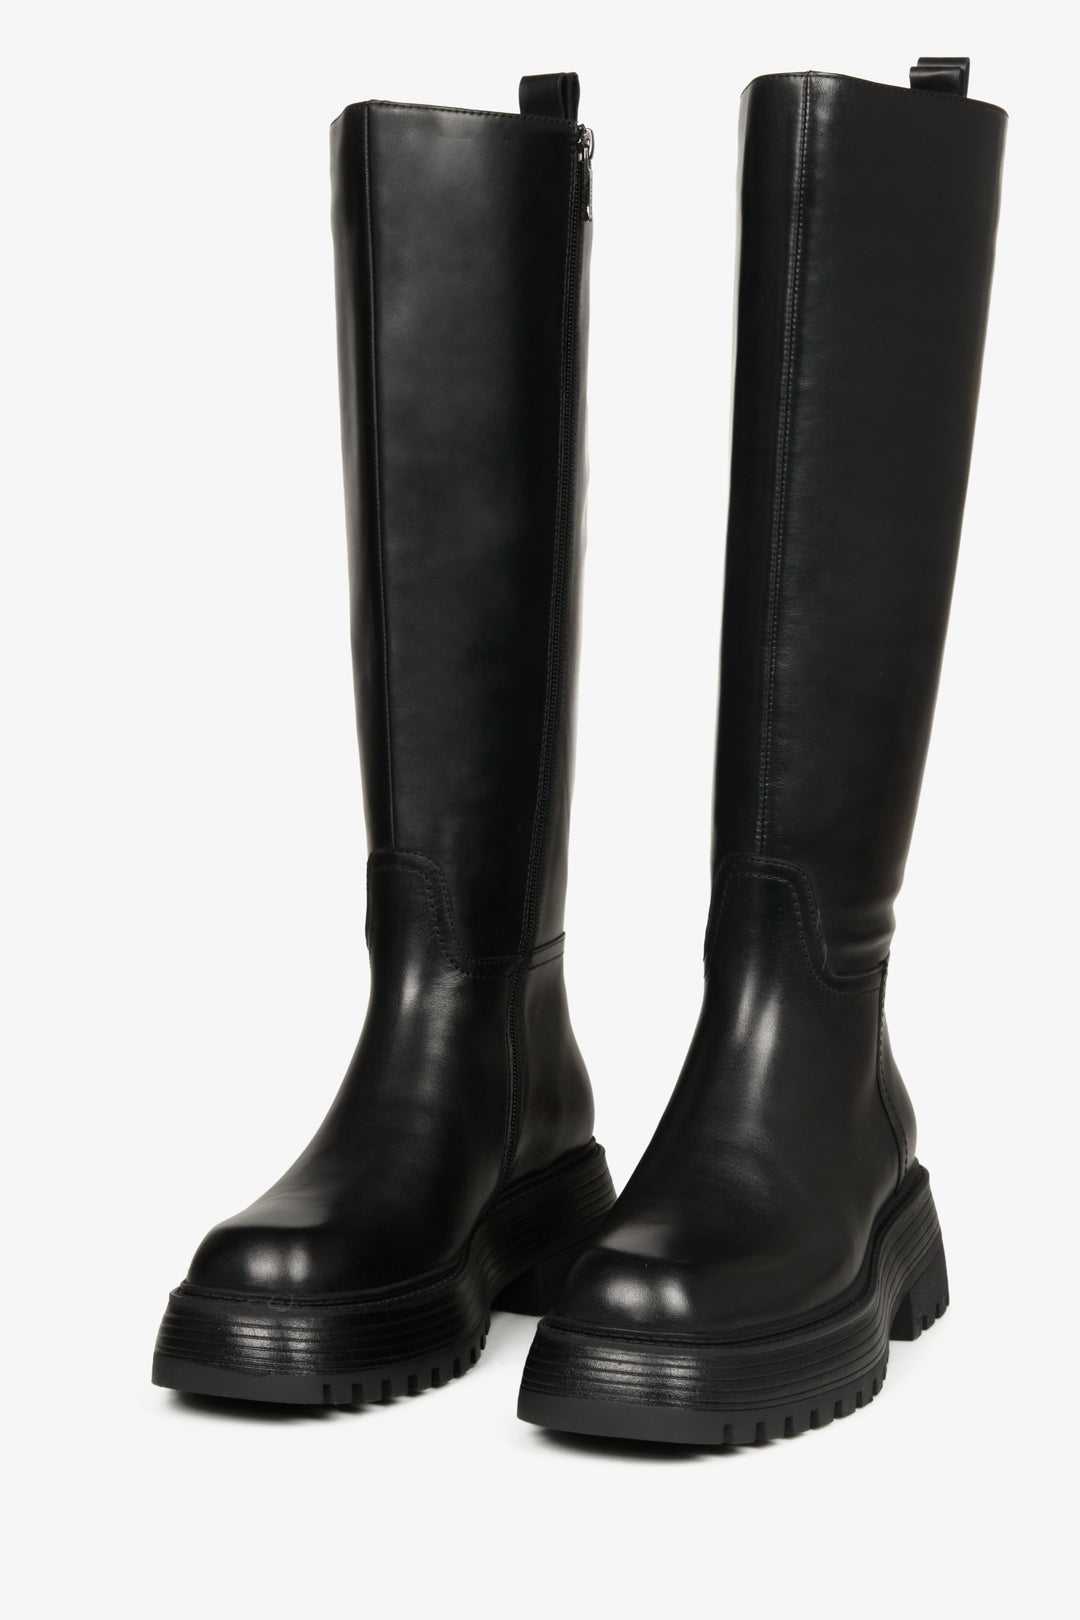 Elevated, fall women's boots made of black genuine leather by Estro - close-up of the front part of the toe line.